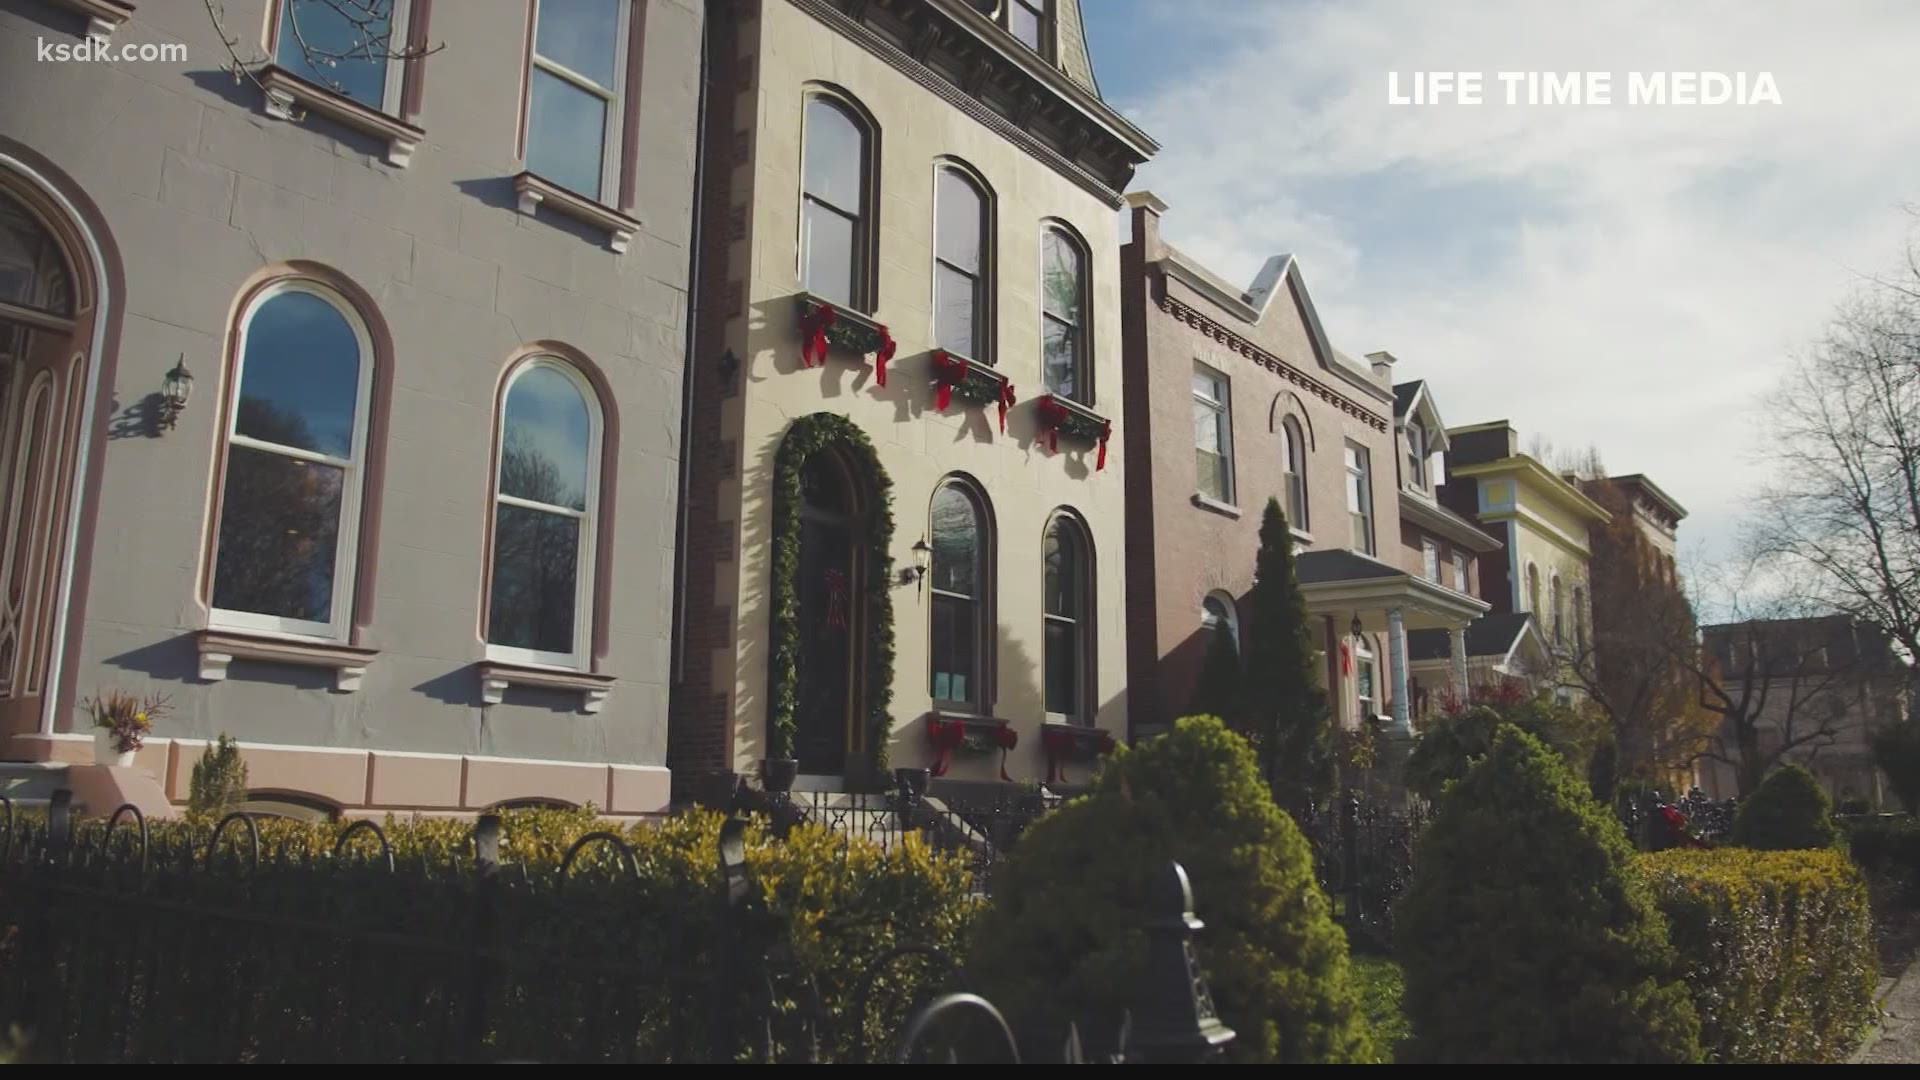 Lafayette Square House Tour celebrates 51 years featuring virtual and